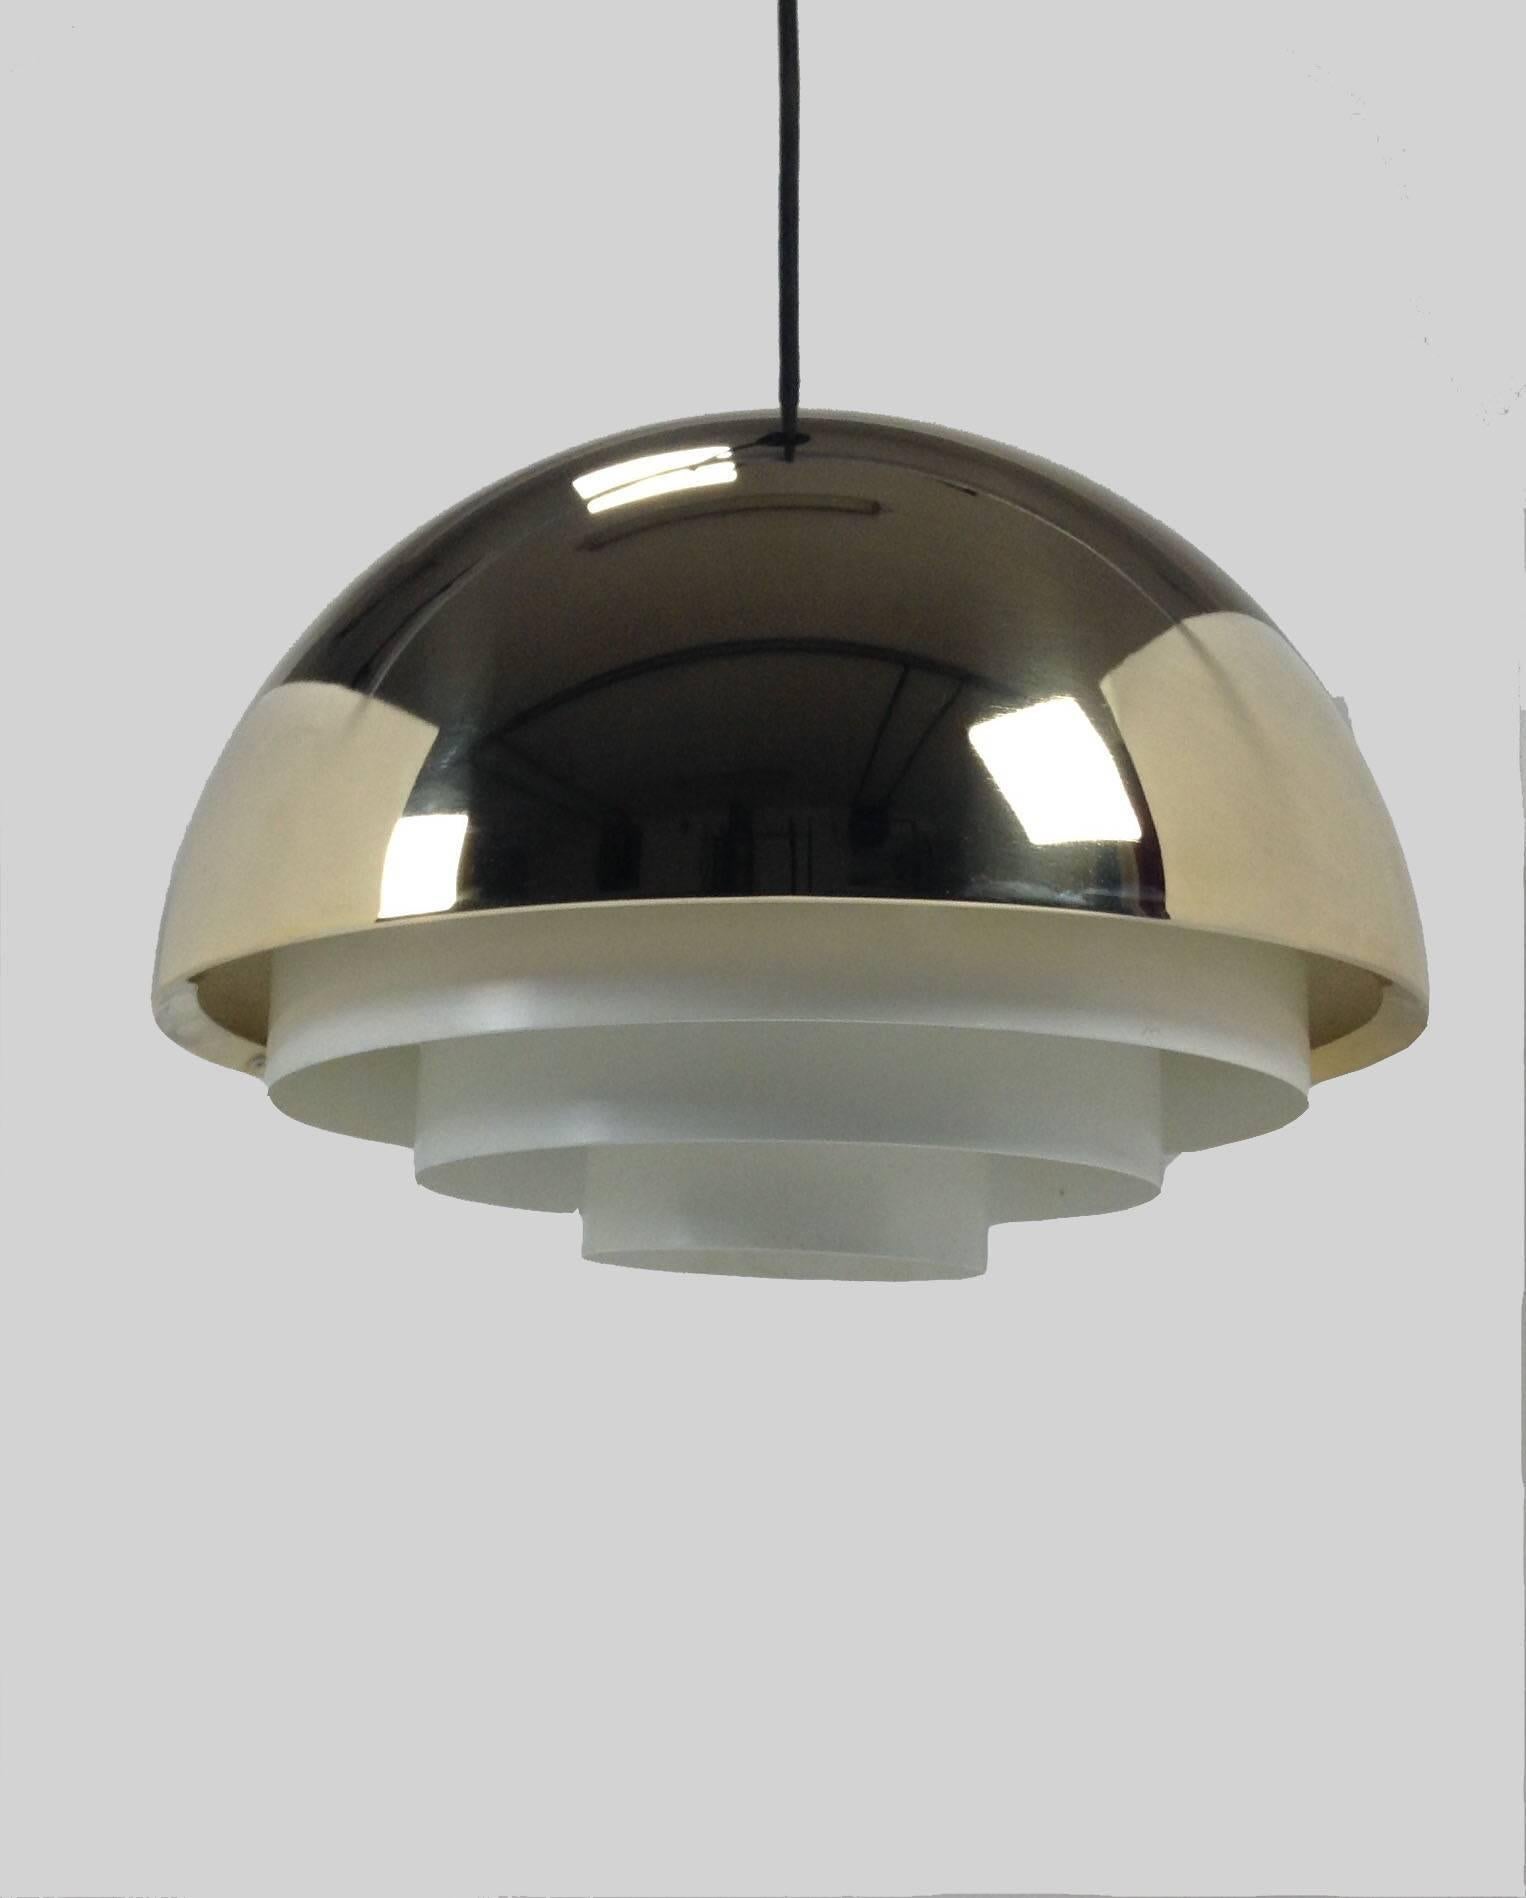 Milieu pendant lamp designed by Jo Hammerborg in the 1960s and manufactured by Fog & Mørup in Denmark.

The shade is made of solid brass with a white metal grill.

The pendant is in very good condition with only few and minor signs of age and wear.

